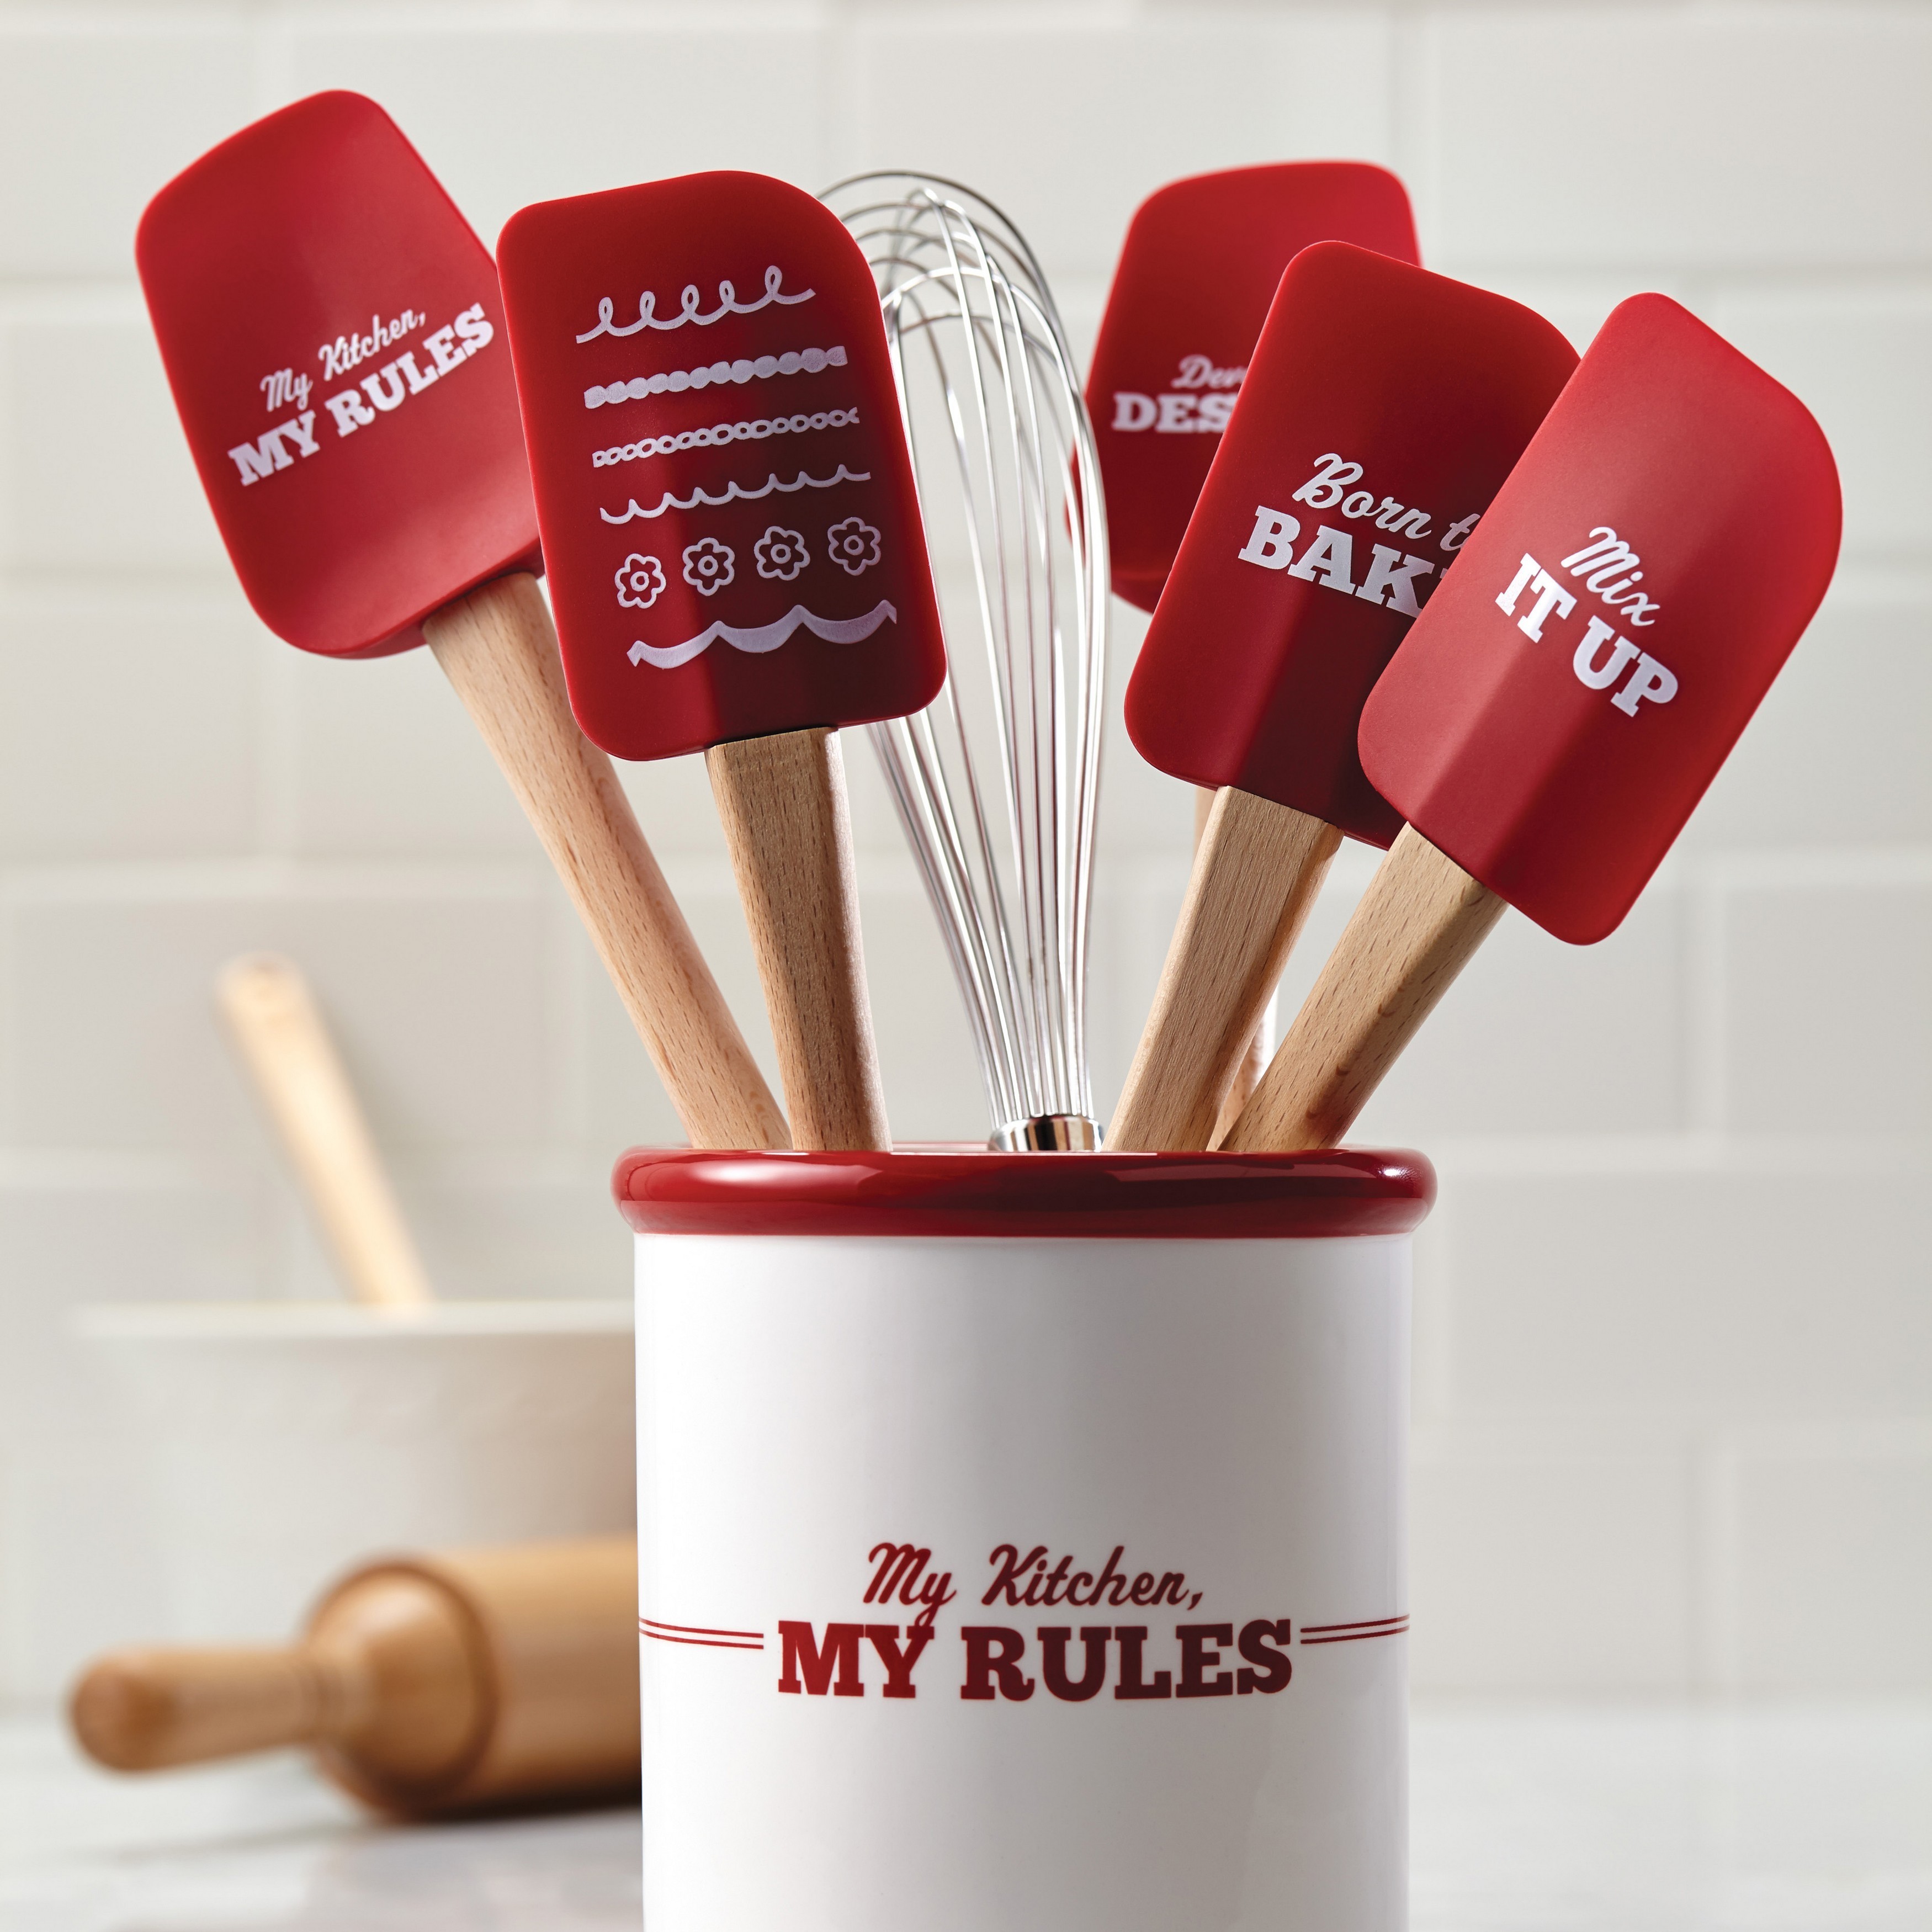 Stainless Steel Cake Lifter, Cake Spatula, Baking Kitchen Essentials - Red  Handle, 1pc - Ralphs